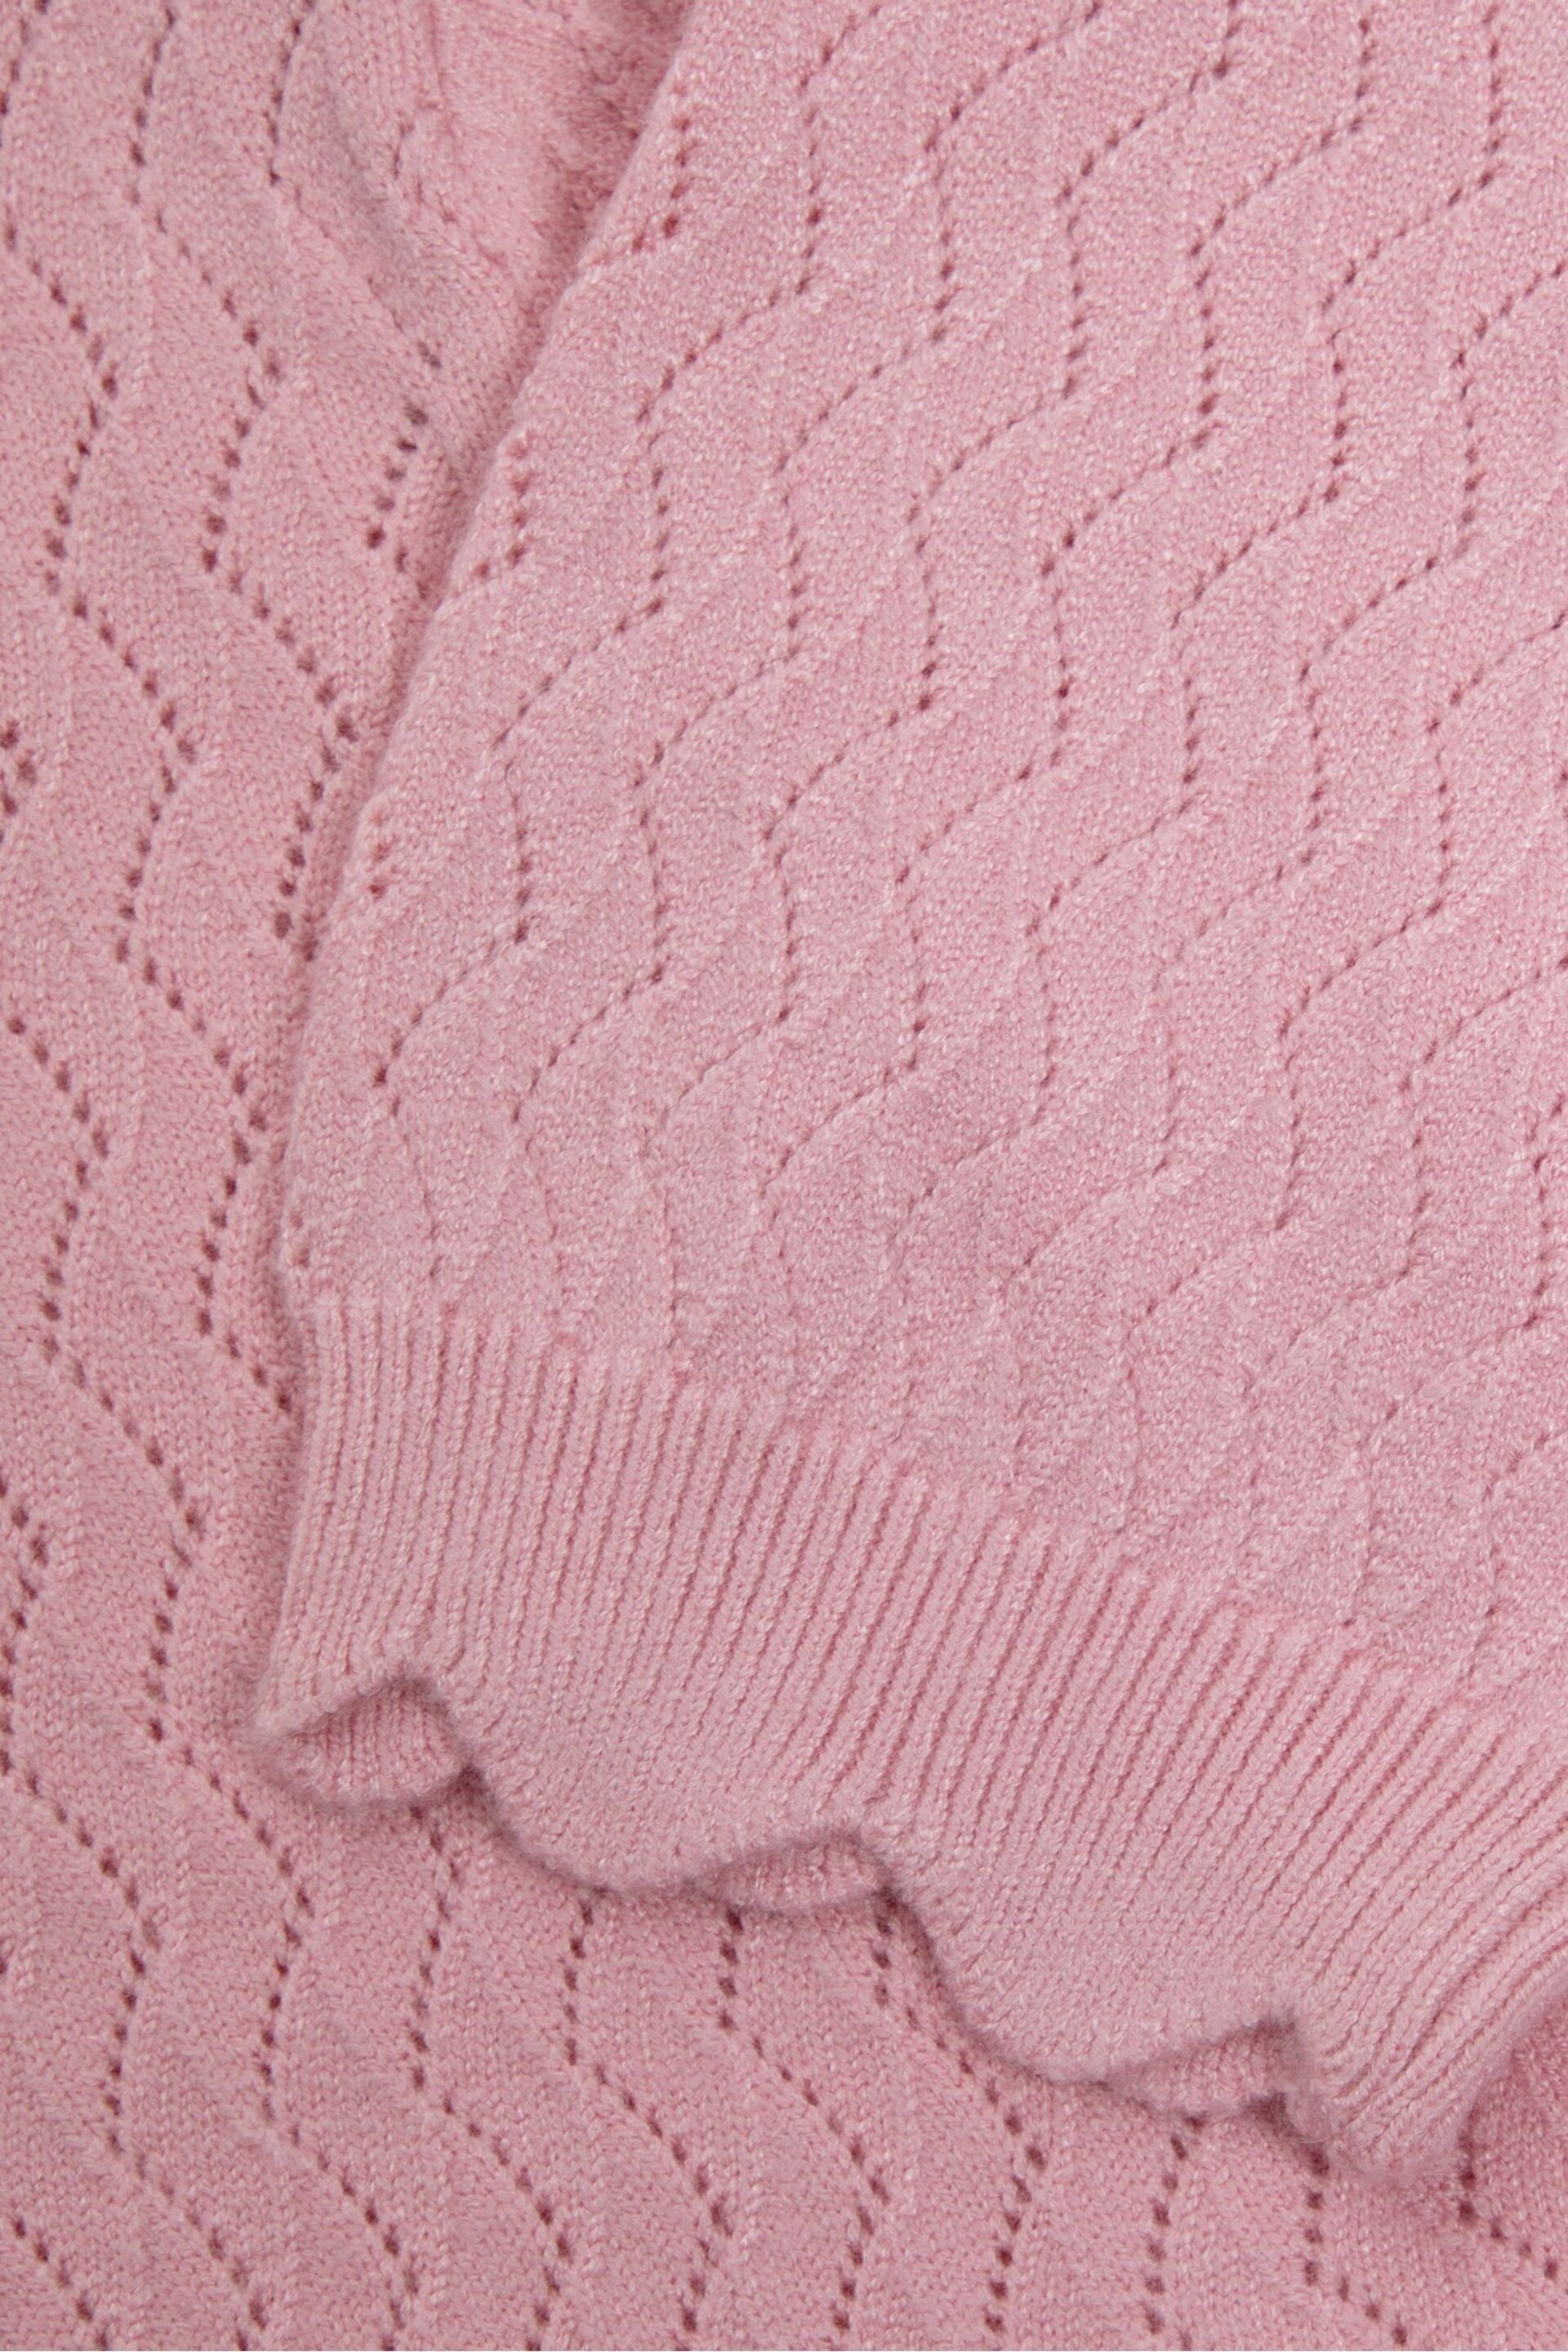 Threadbare Pink Pointelle Knitted Top - Image 4 of 4